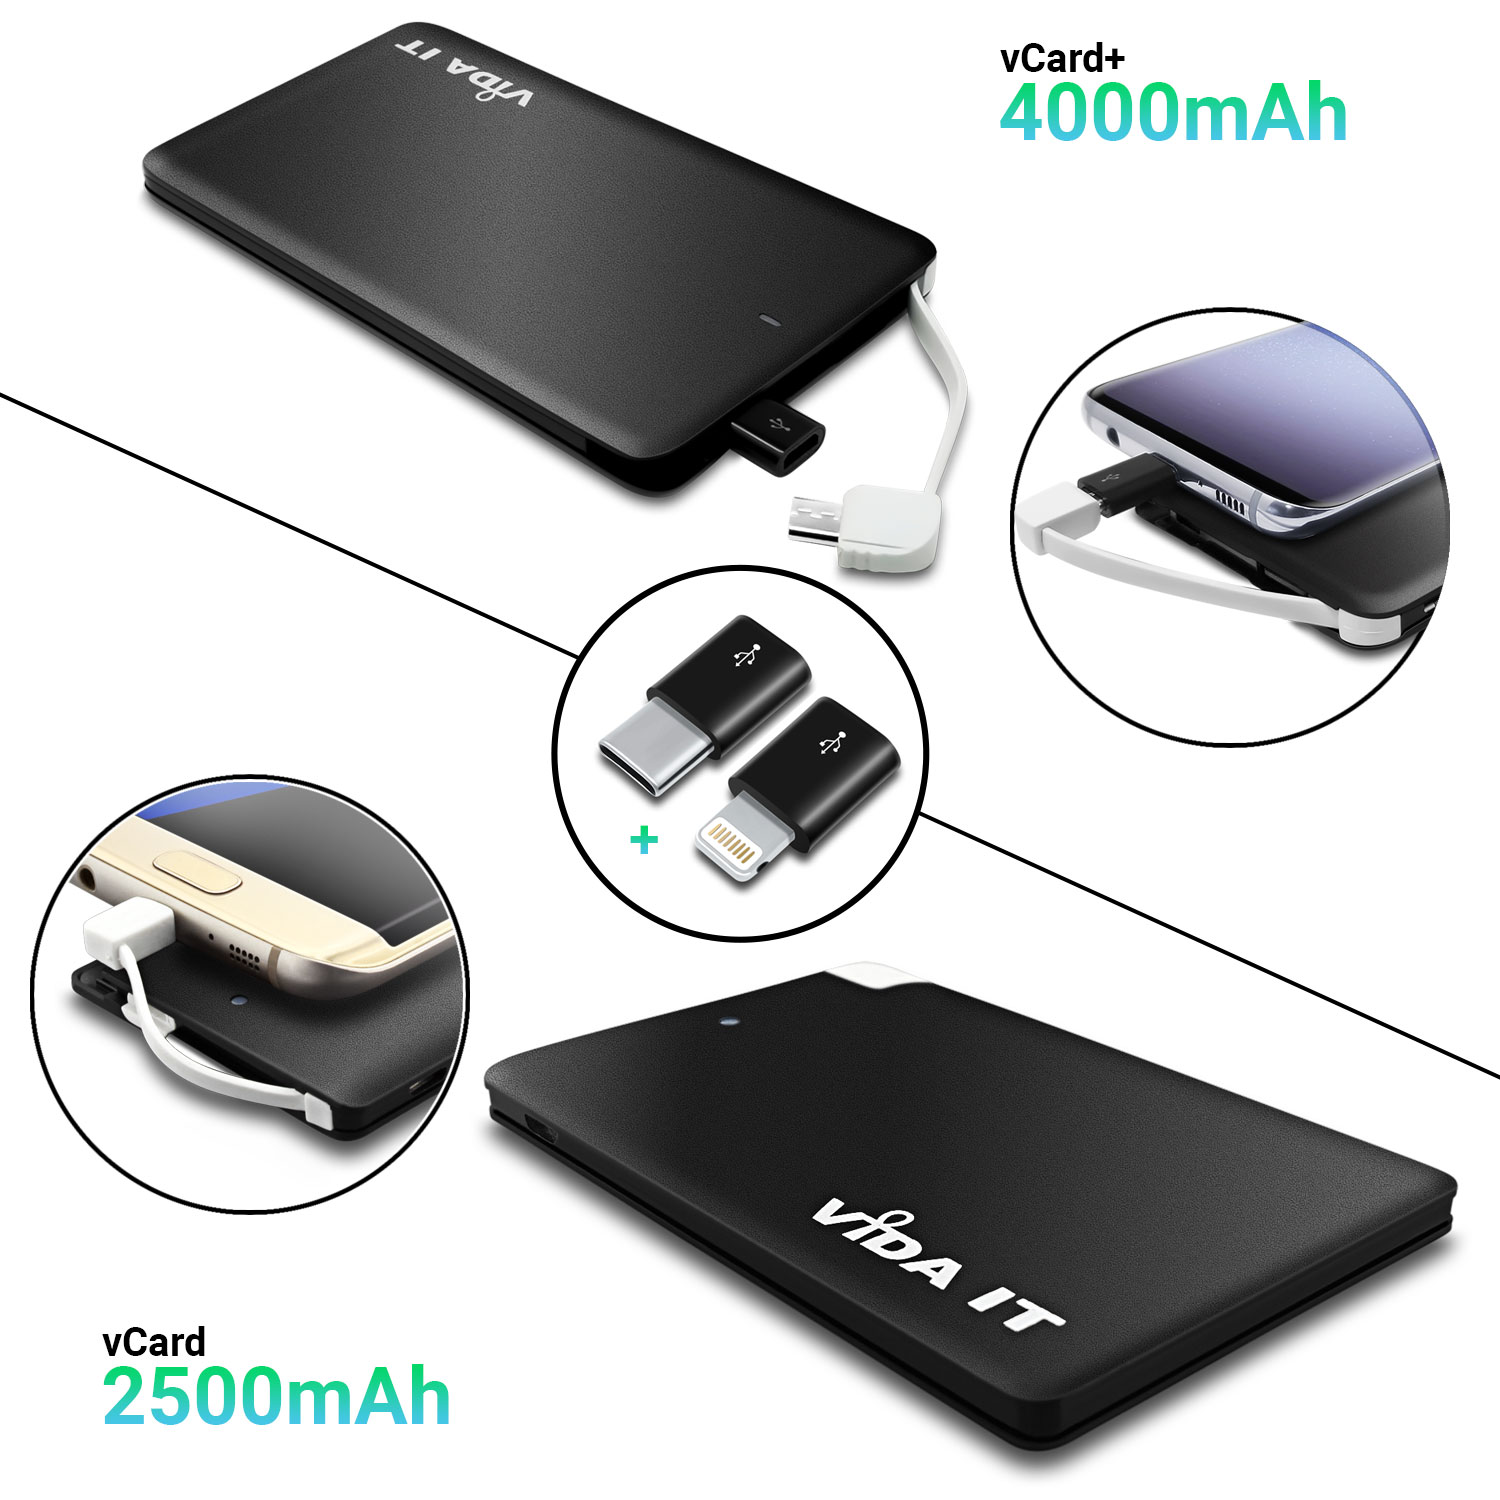 vCard slim Power Bank 2500mAh Capacity USB external battery pack thin portable USB charger with built-in micro-usb charging cable plus two adapters for iPhone and type-C usb-c connectors for iPhone iPad Android mobile phone smartphone tablet pc